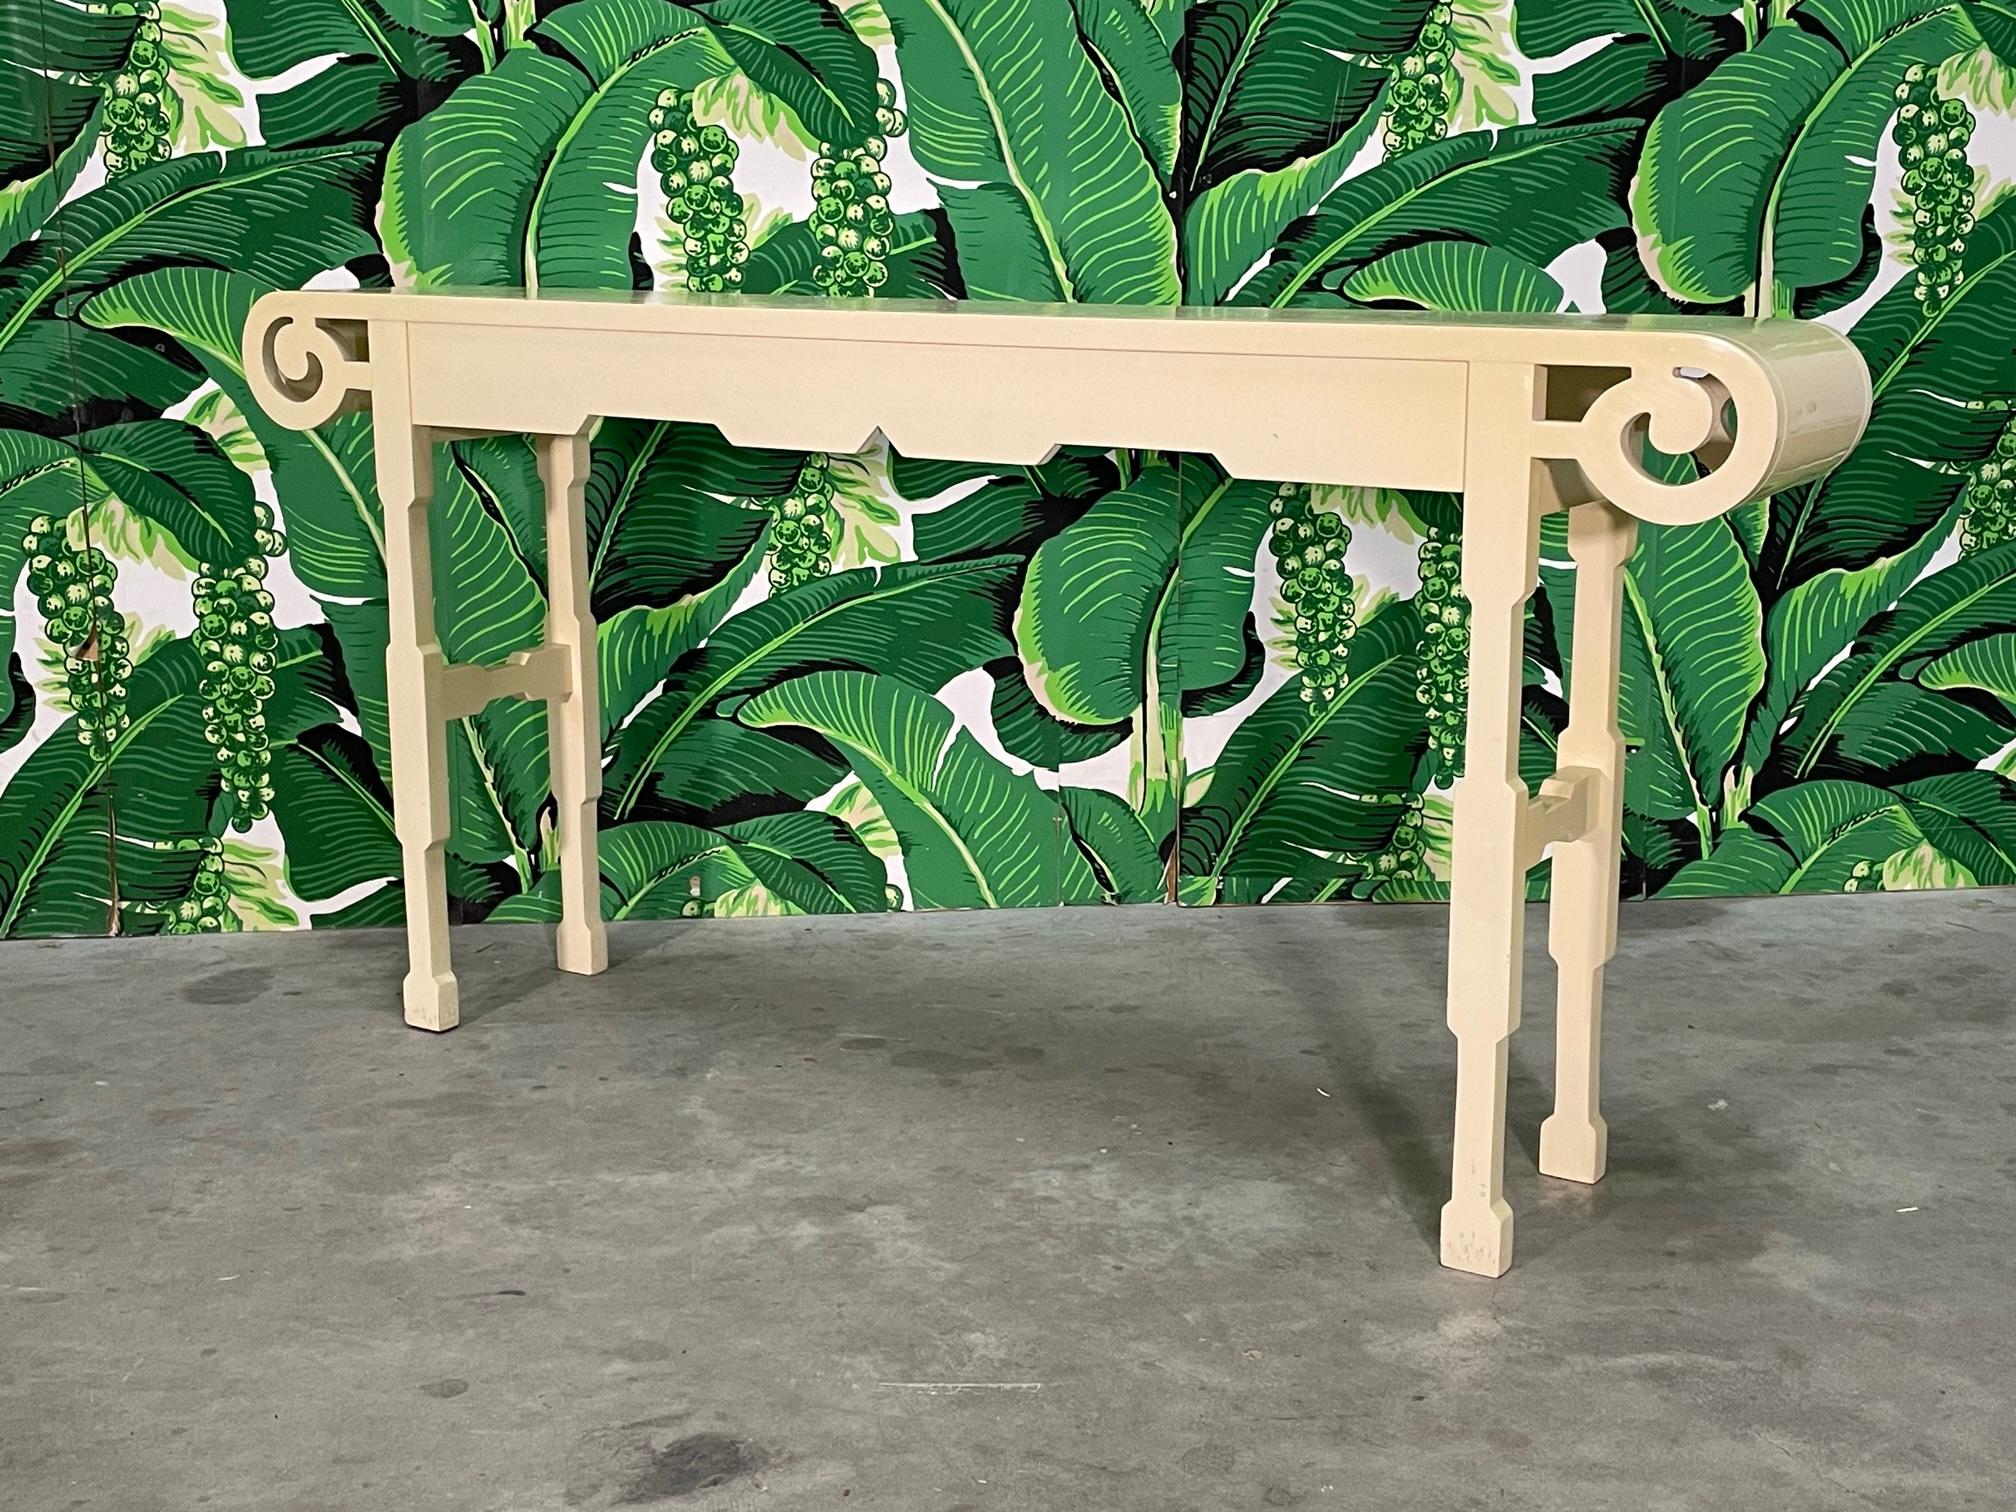 Solid wood console table features a modern take on neoclassical revival style with it's scroll carved top. Good vintage condition imperfections consistent with age, see photos for condition details. 
For a shipping quote to your exact zip code,